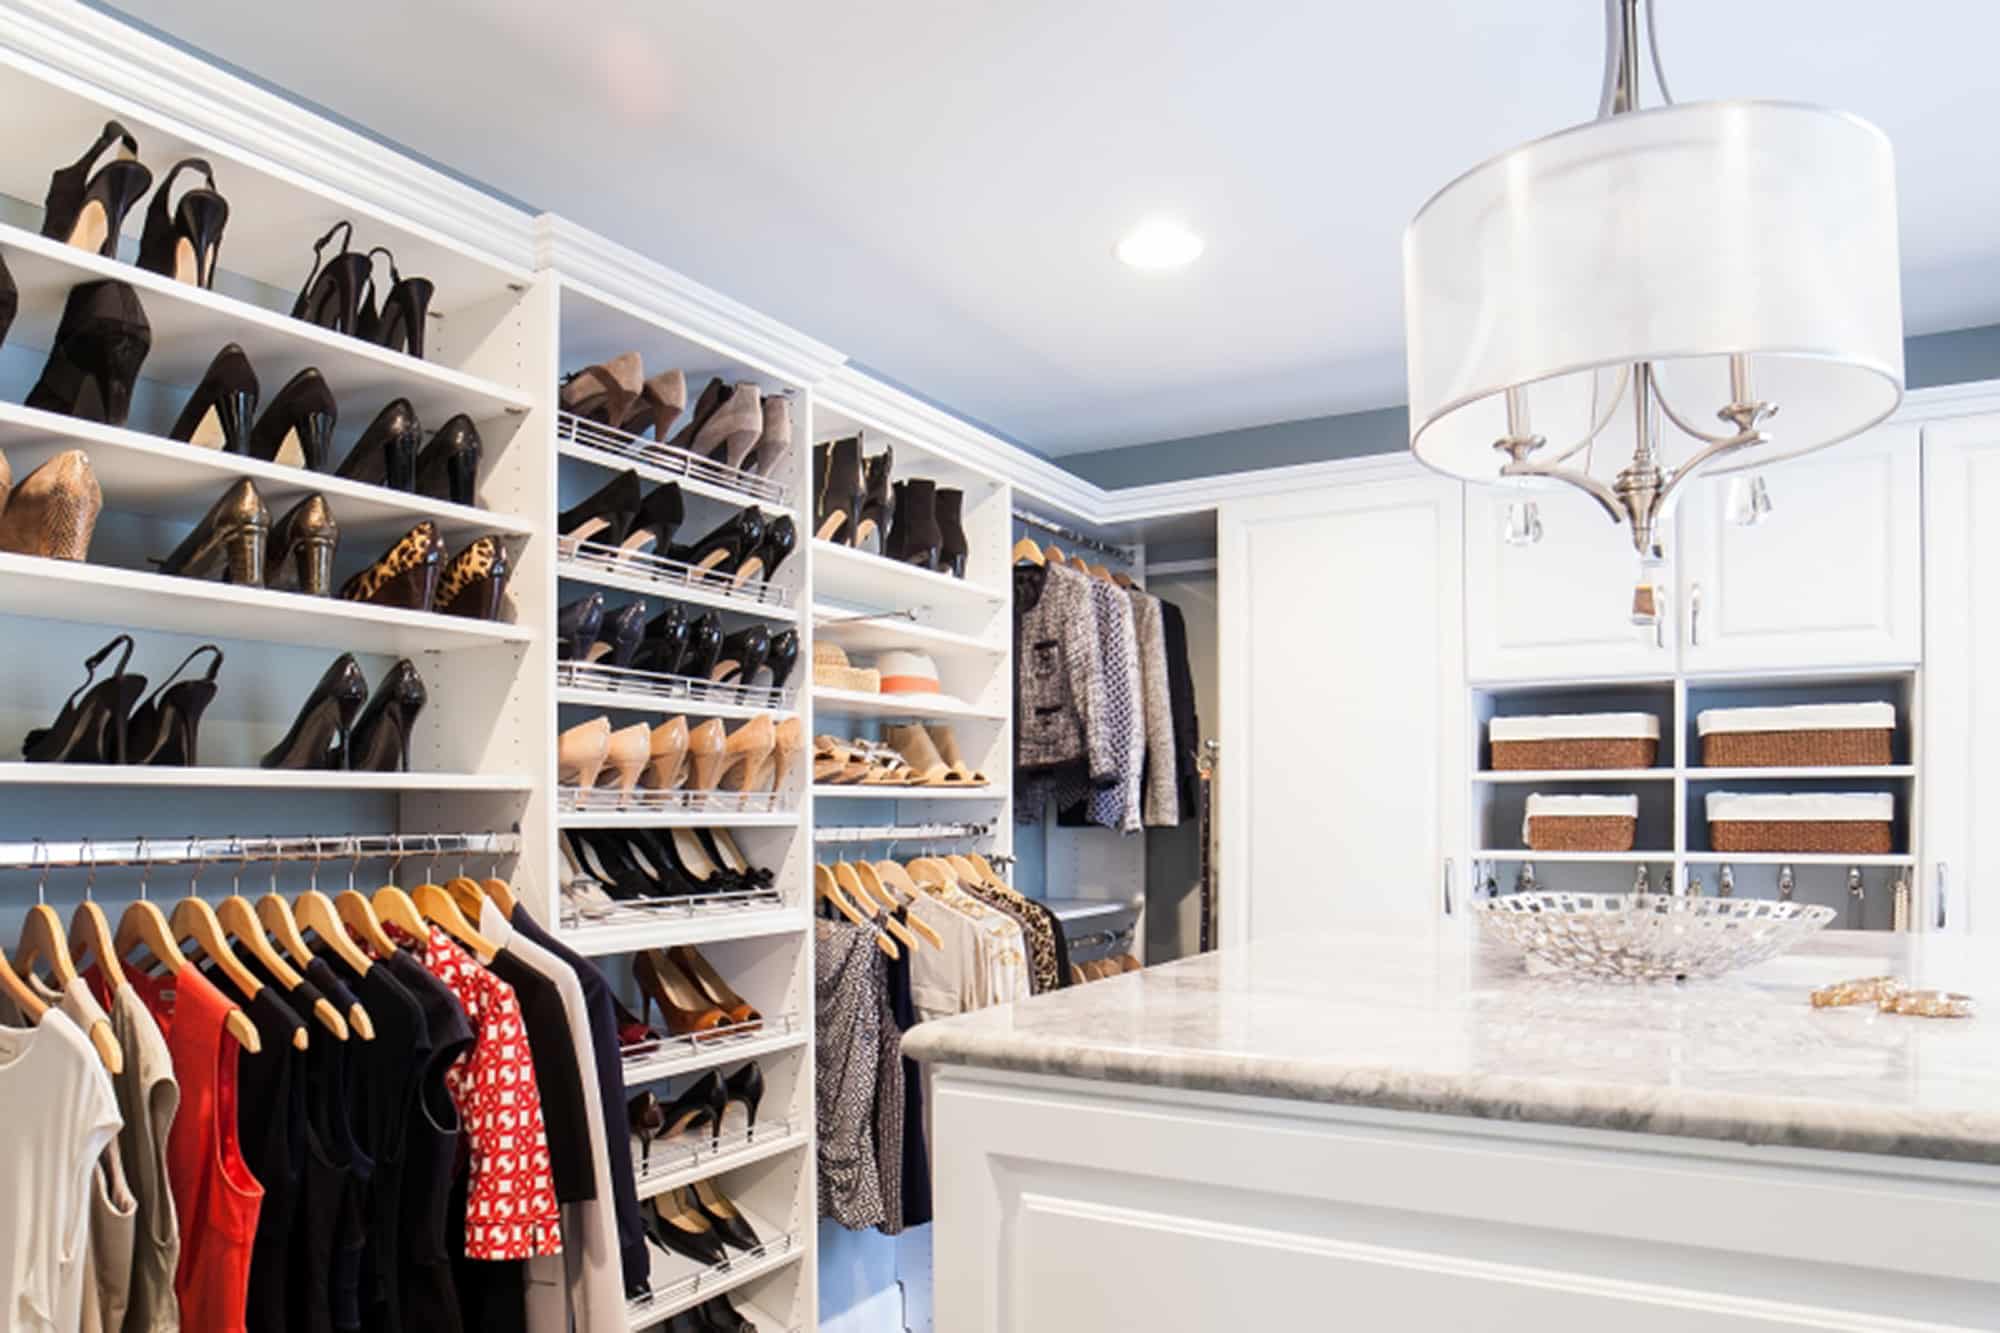 Large closet with extensive shoe storage and granite countertop in the middle